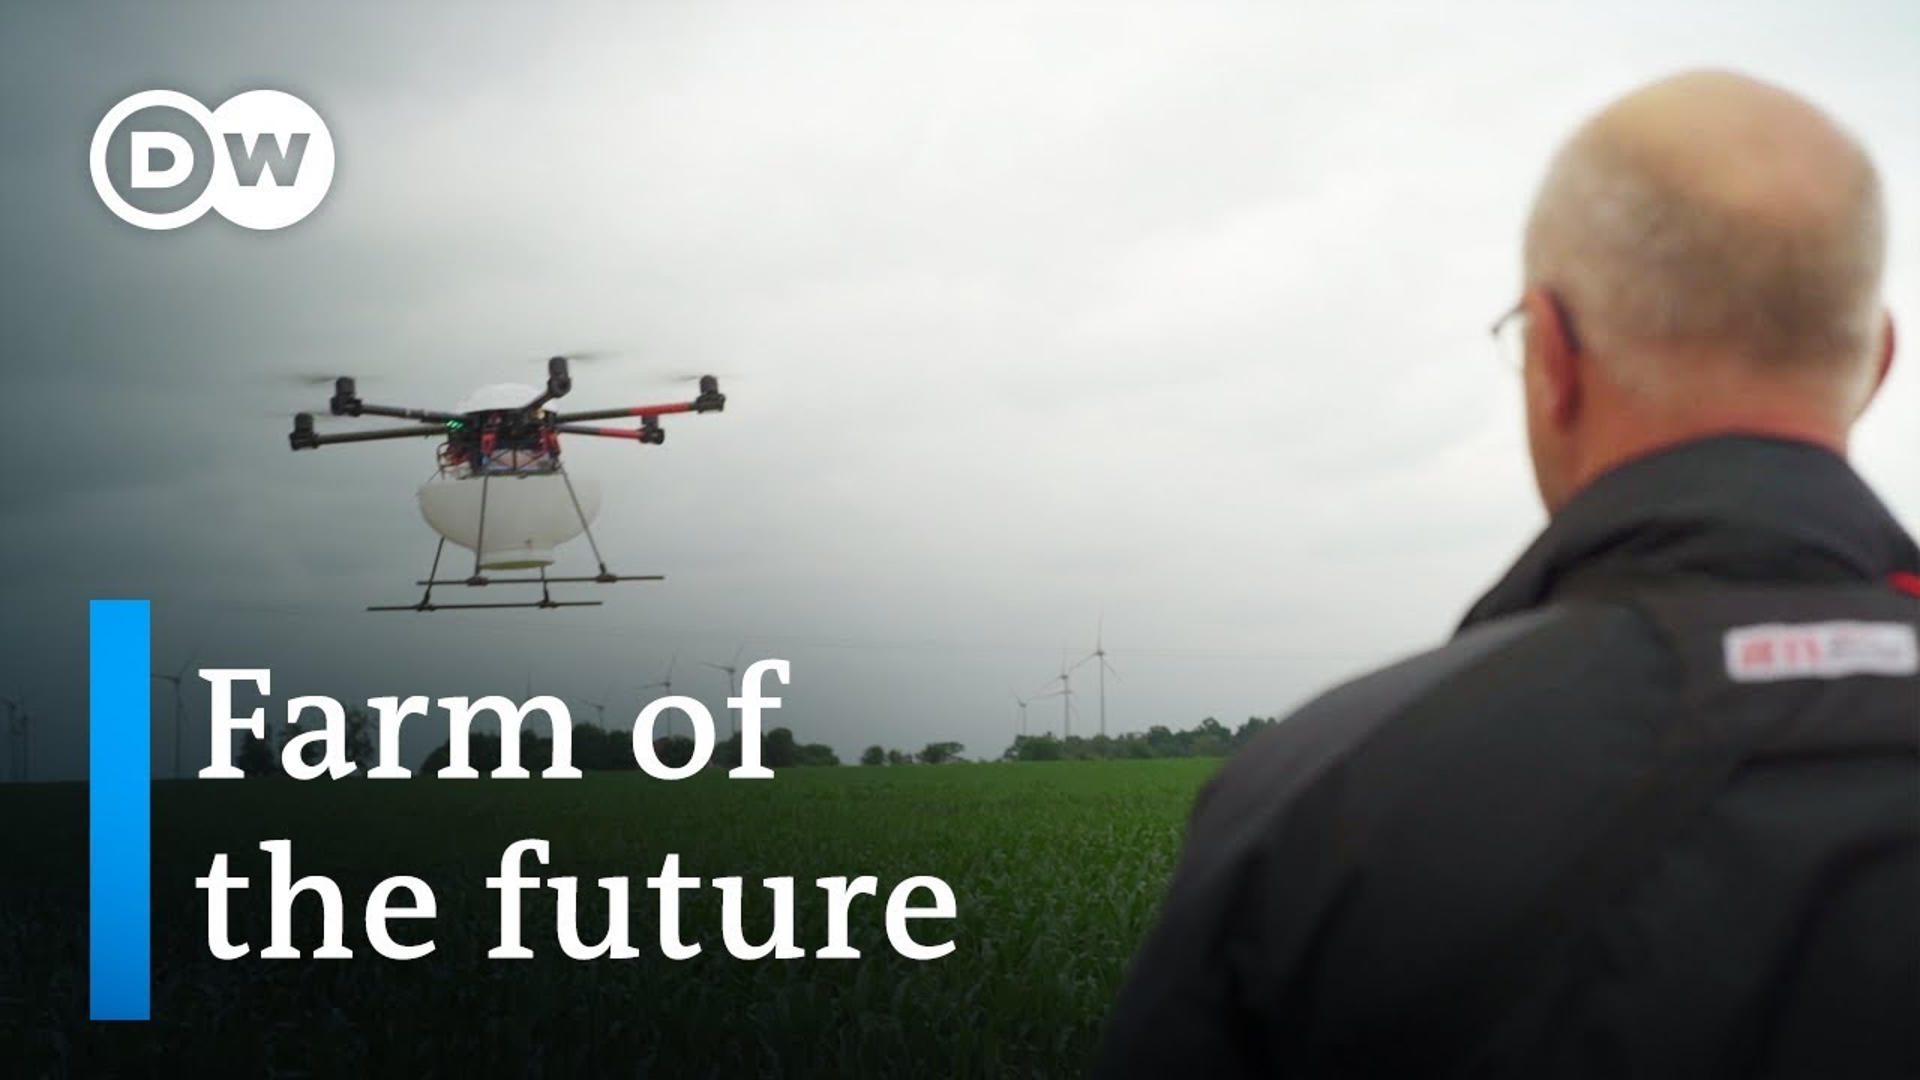 Watch Full Movie - Drones, Robots and Super Sperm - the Future of Farming